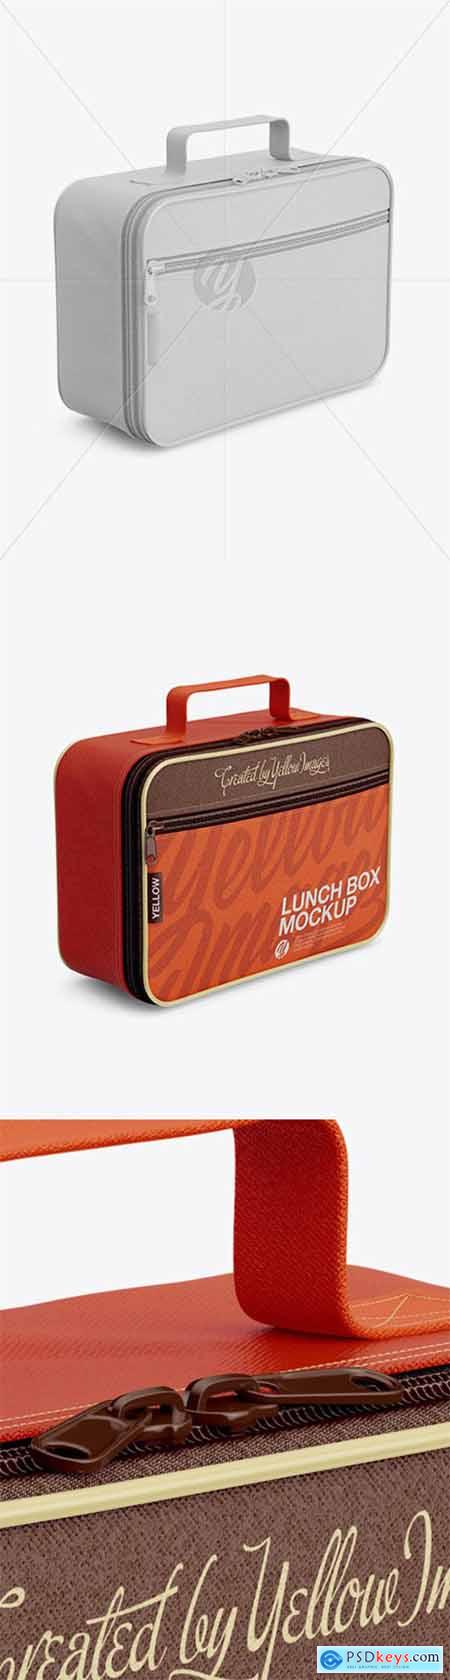 Download Lunch Box Mockup - Half Side View 23023 » Free Download ...